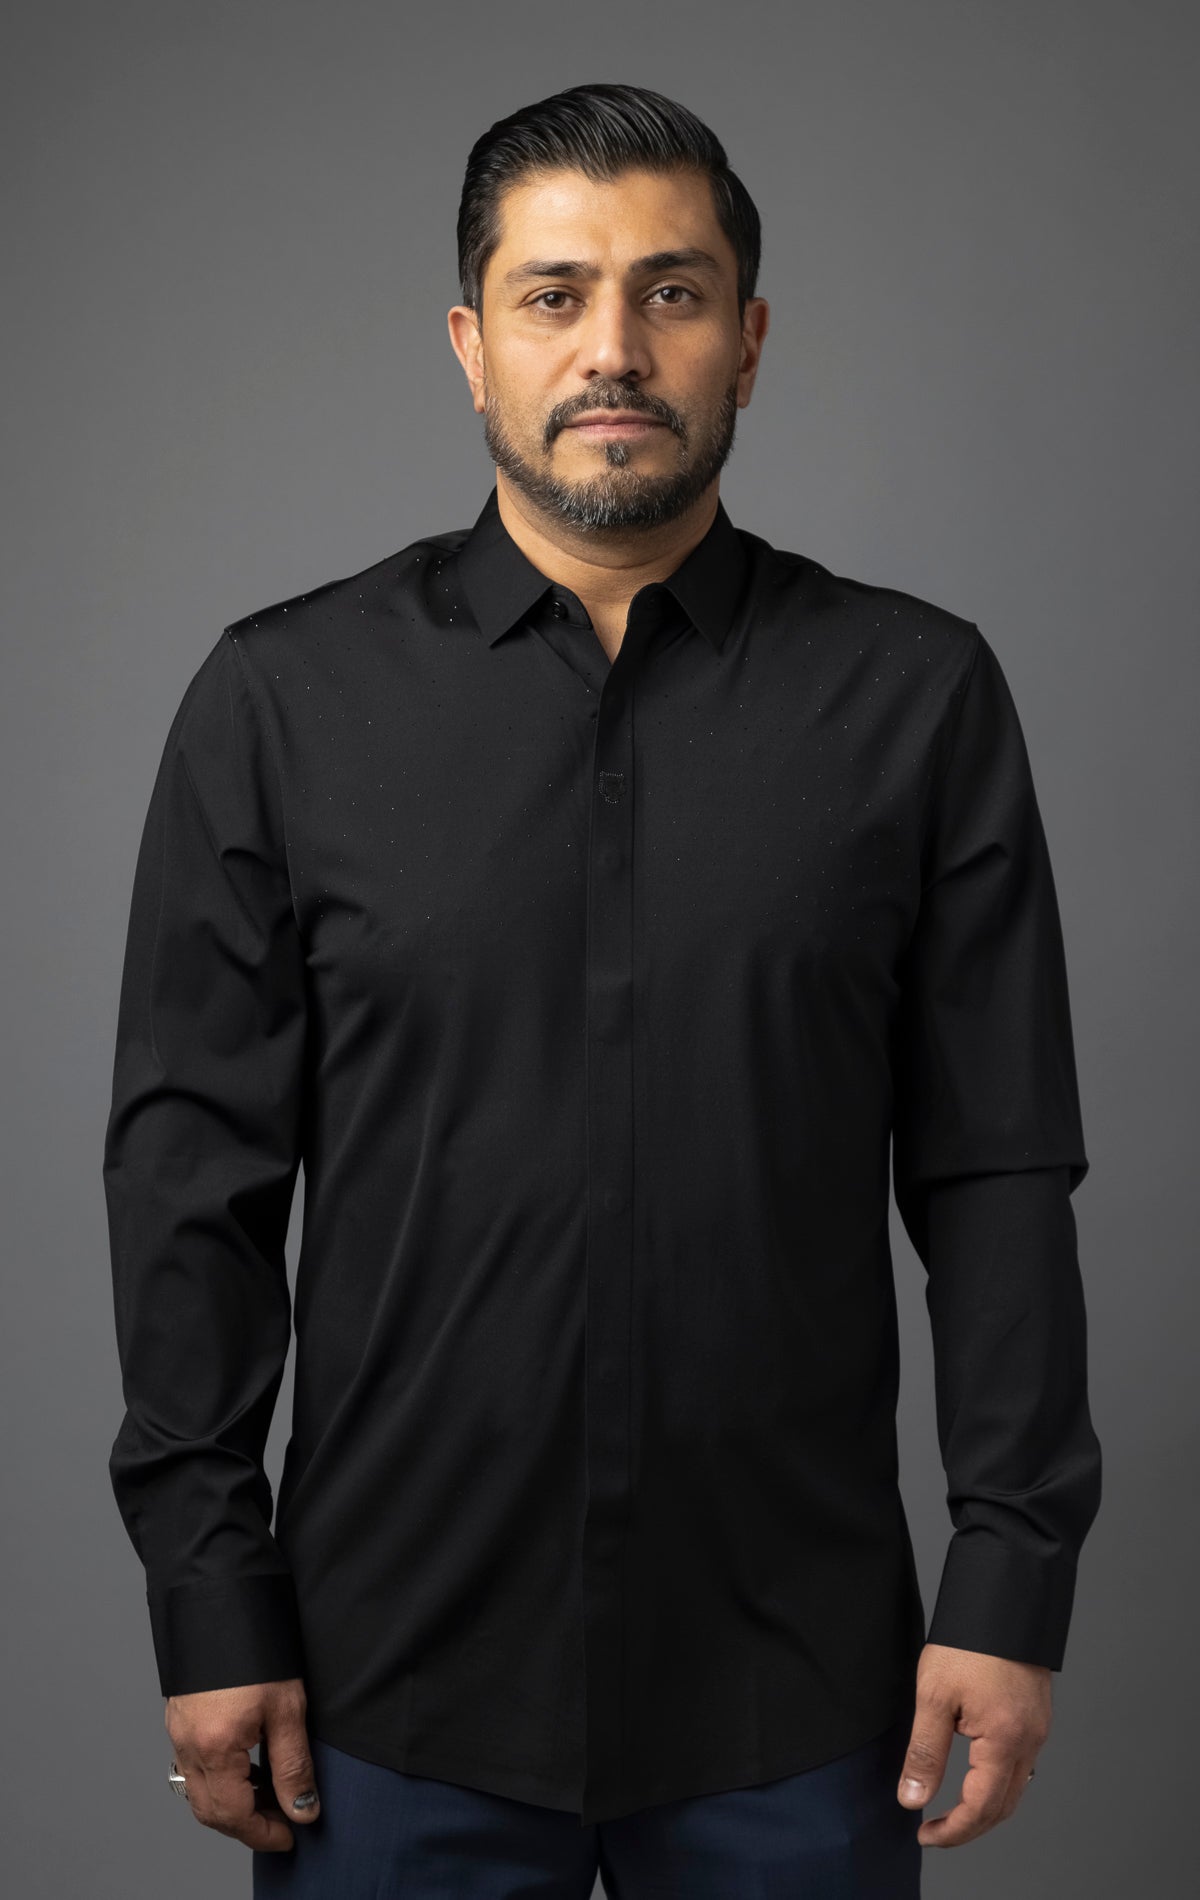 Men's formal black button-up shirt with long sleeves.